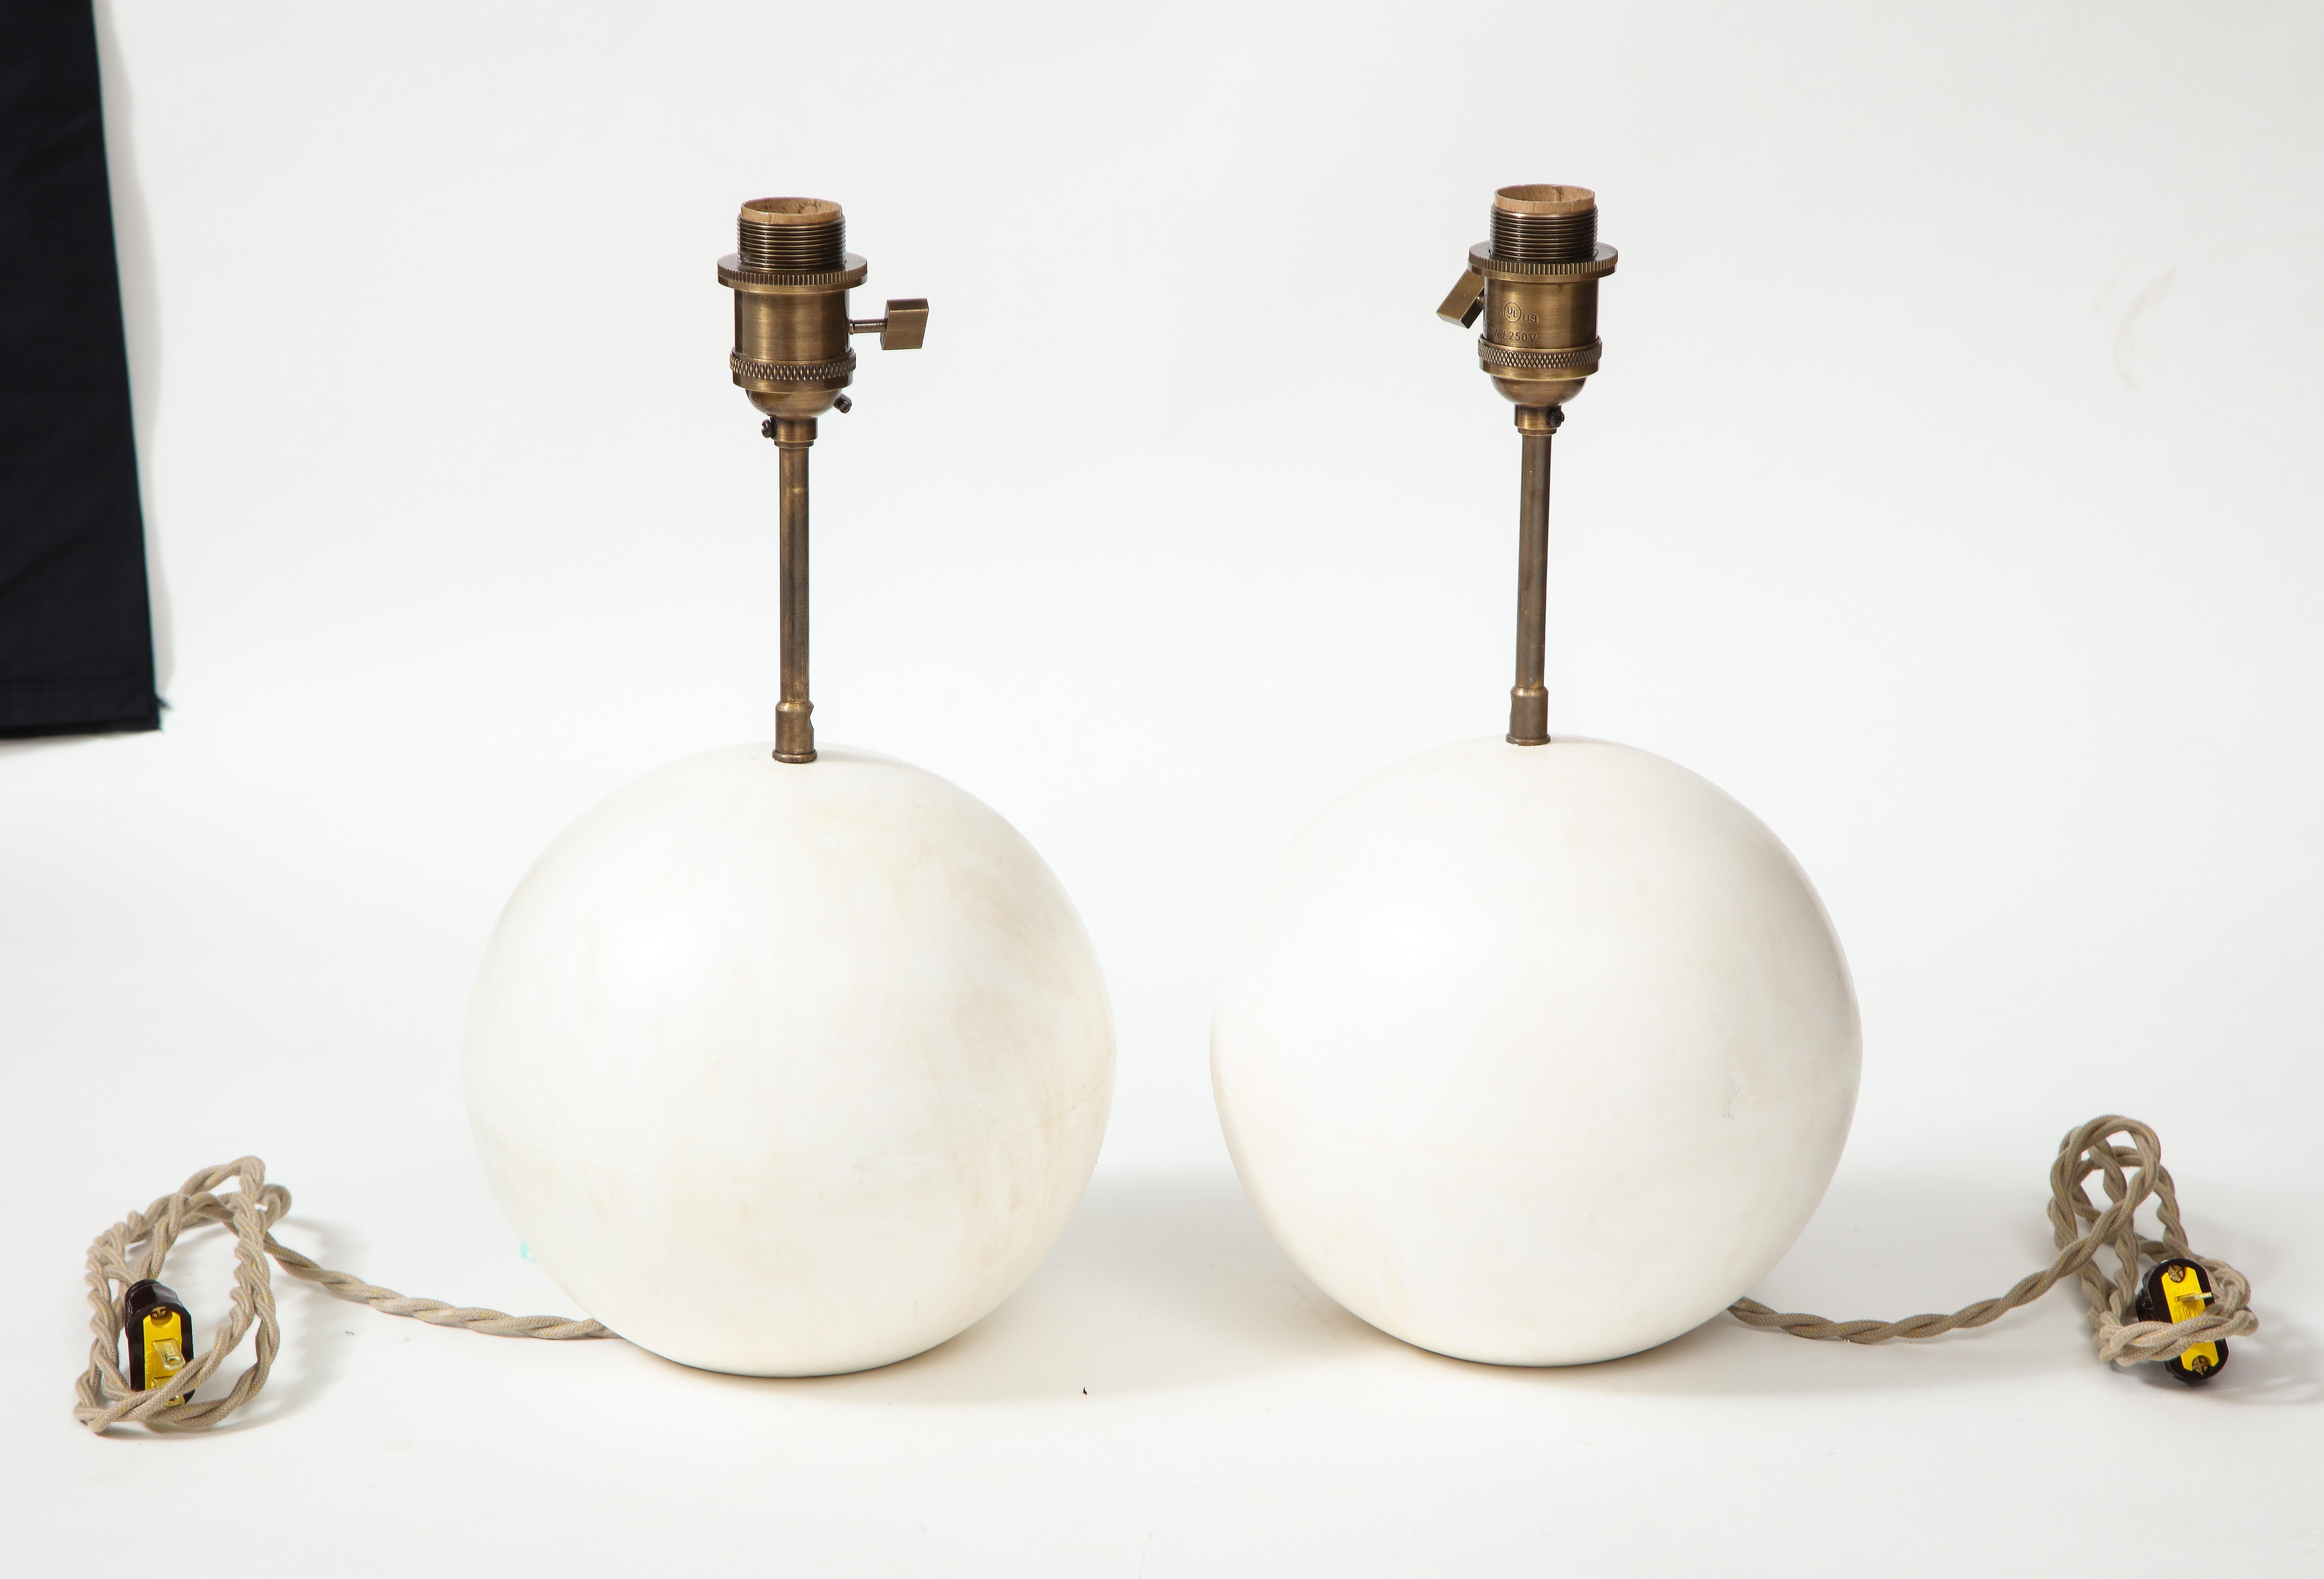 Contemporary Pair of Creme White Plaster Table Lamps by Facto Atelier Paris, France, 2020